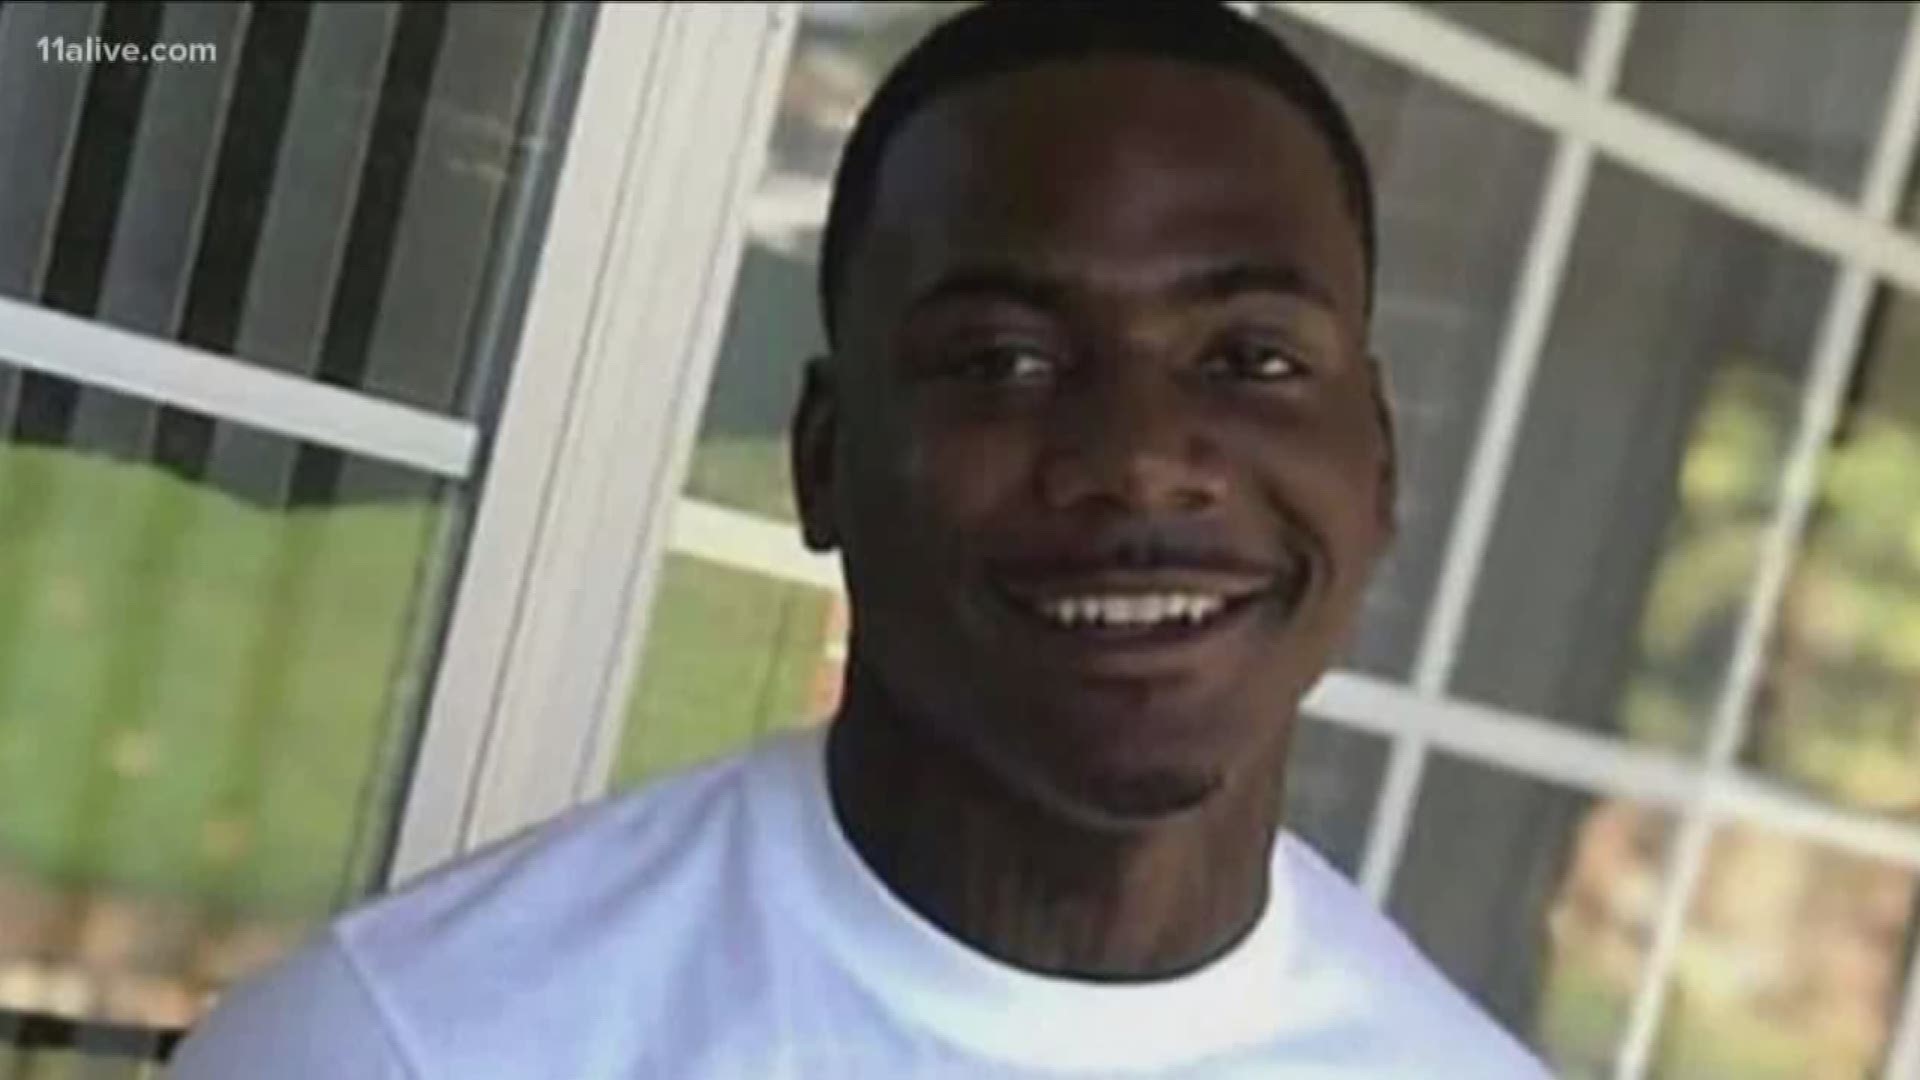 He was killed being served a warrant for armed robbery by an Atlanta Police officer. But, now a witness says that armed robbery never happened.